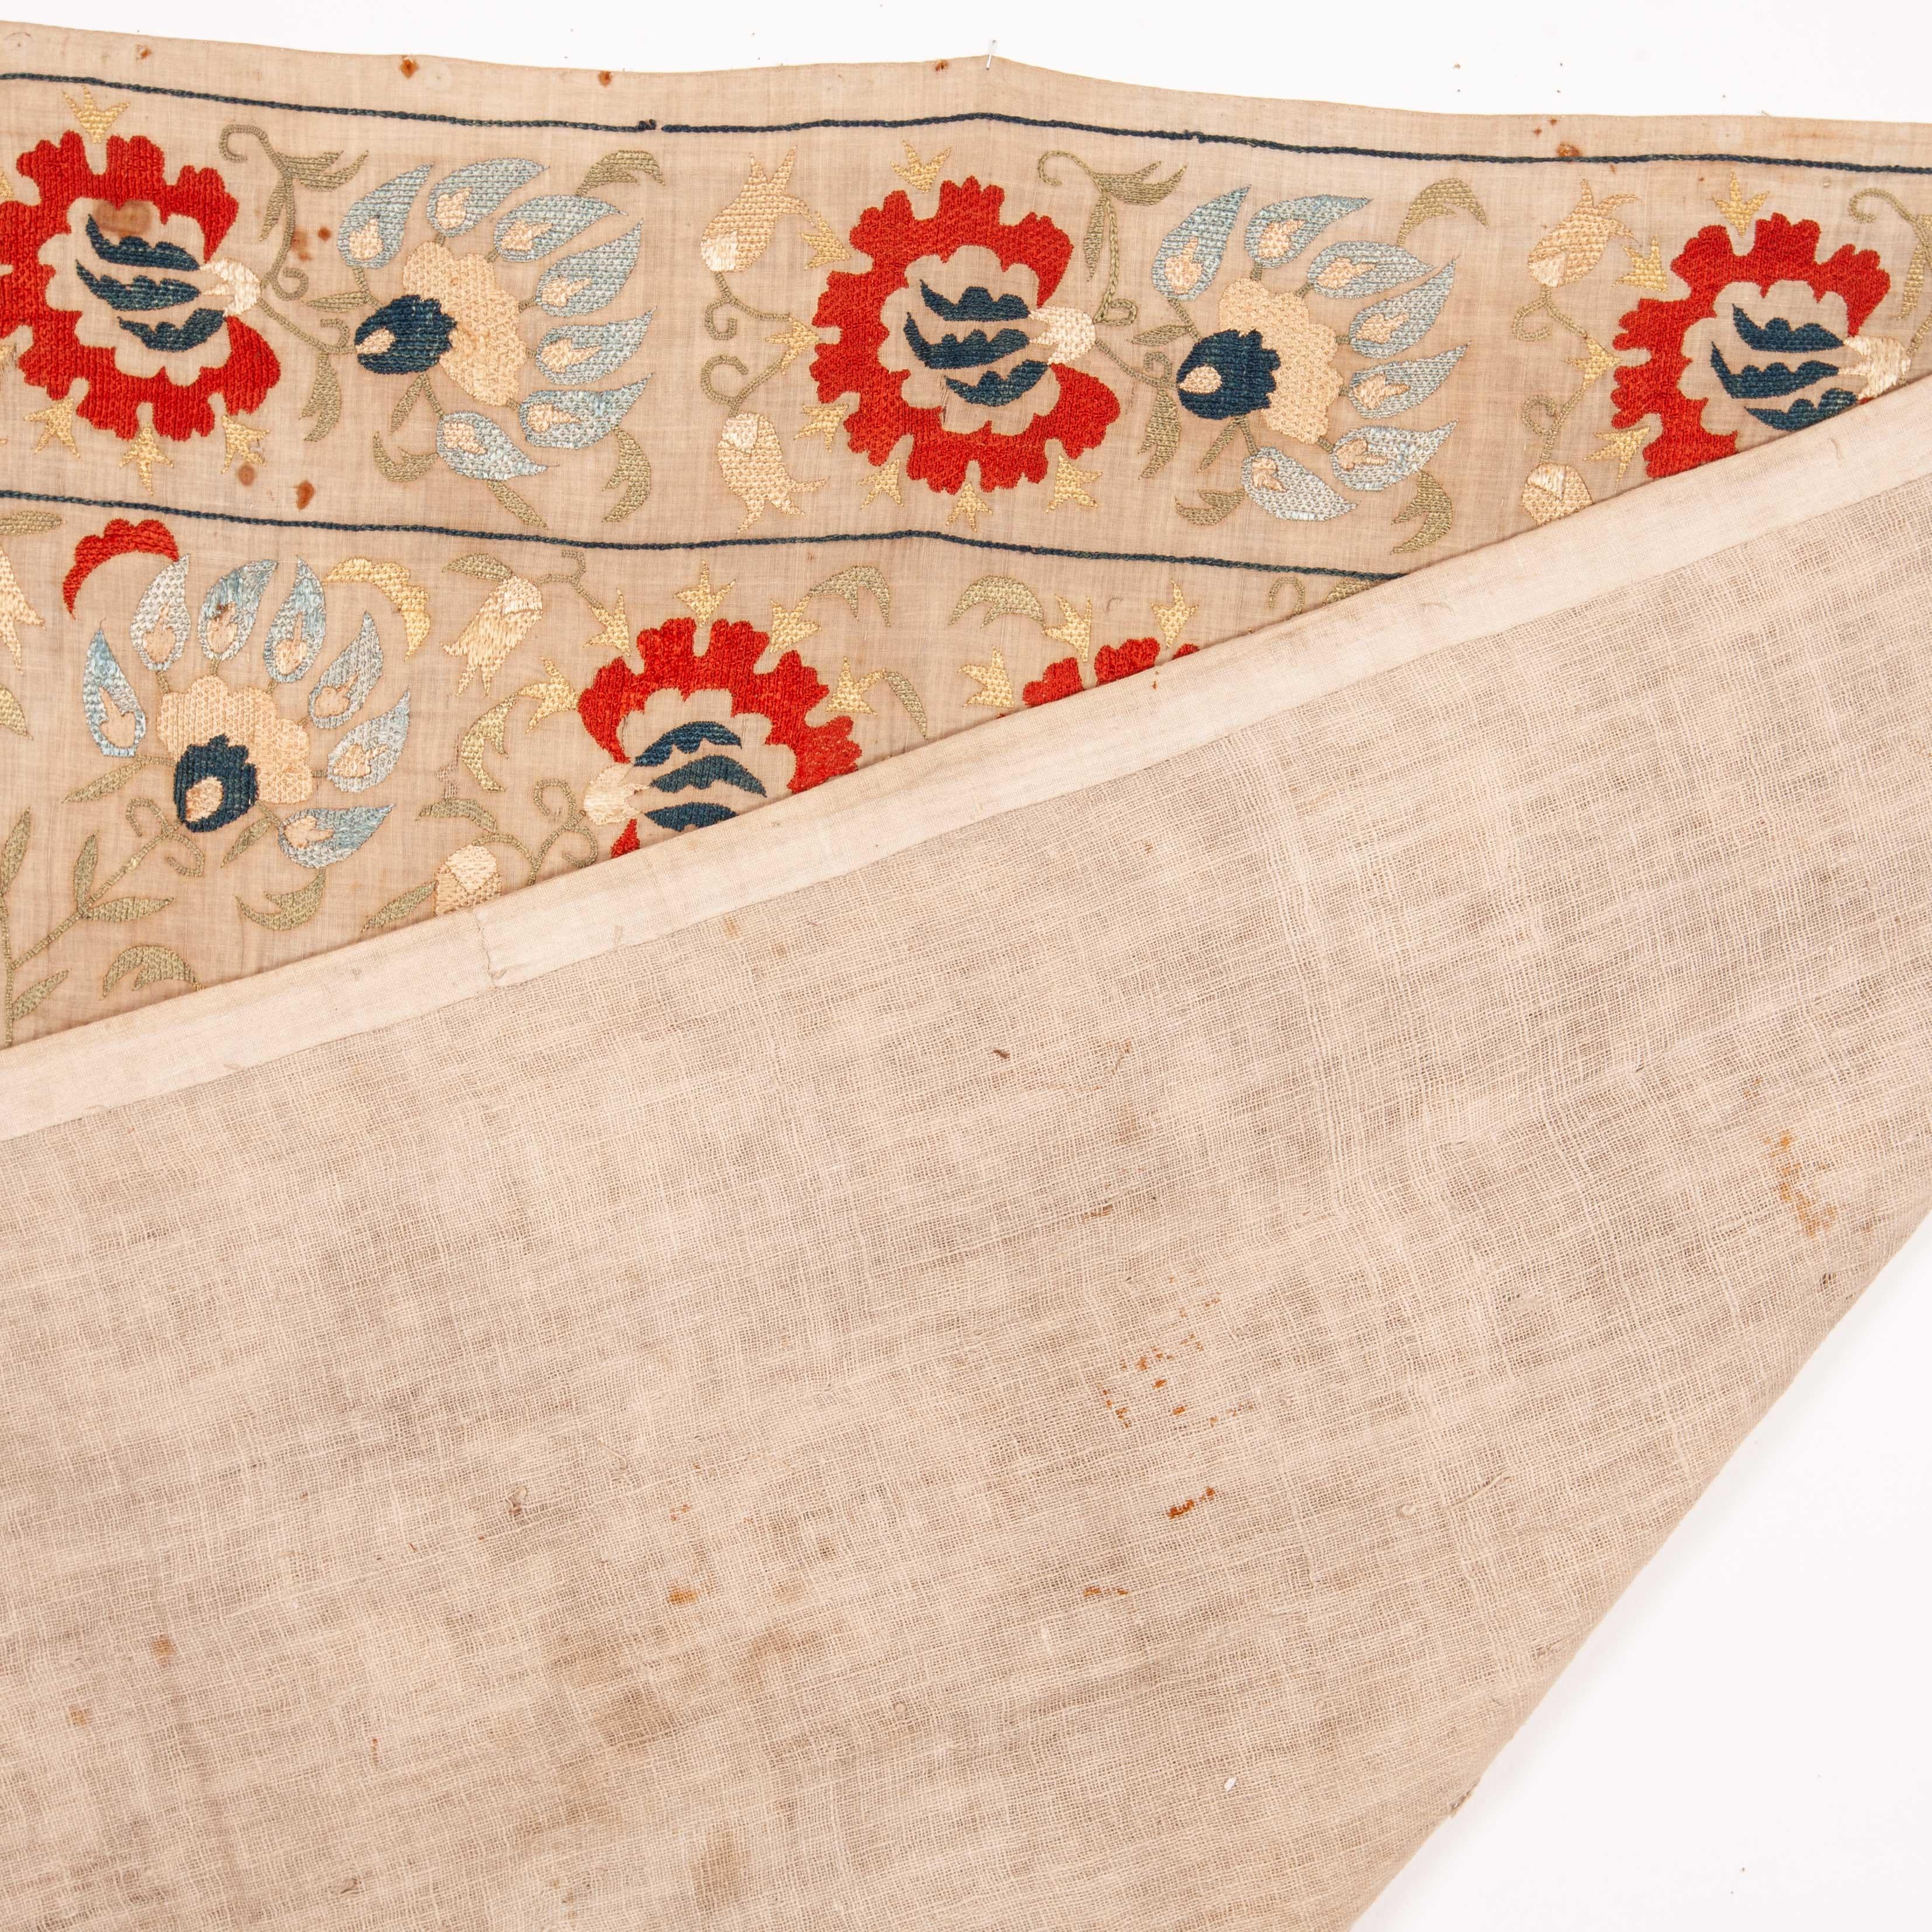 Hand-Woven Ottoman Turkish Bokhce 'Wrapping Cloth', Early 19th Century